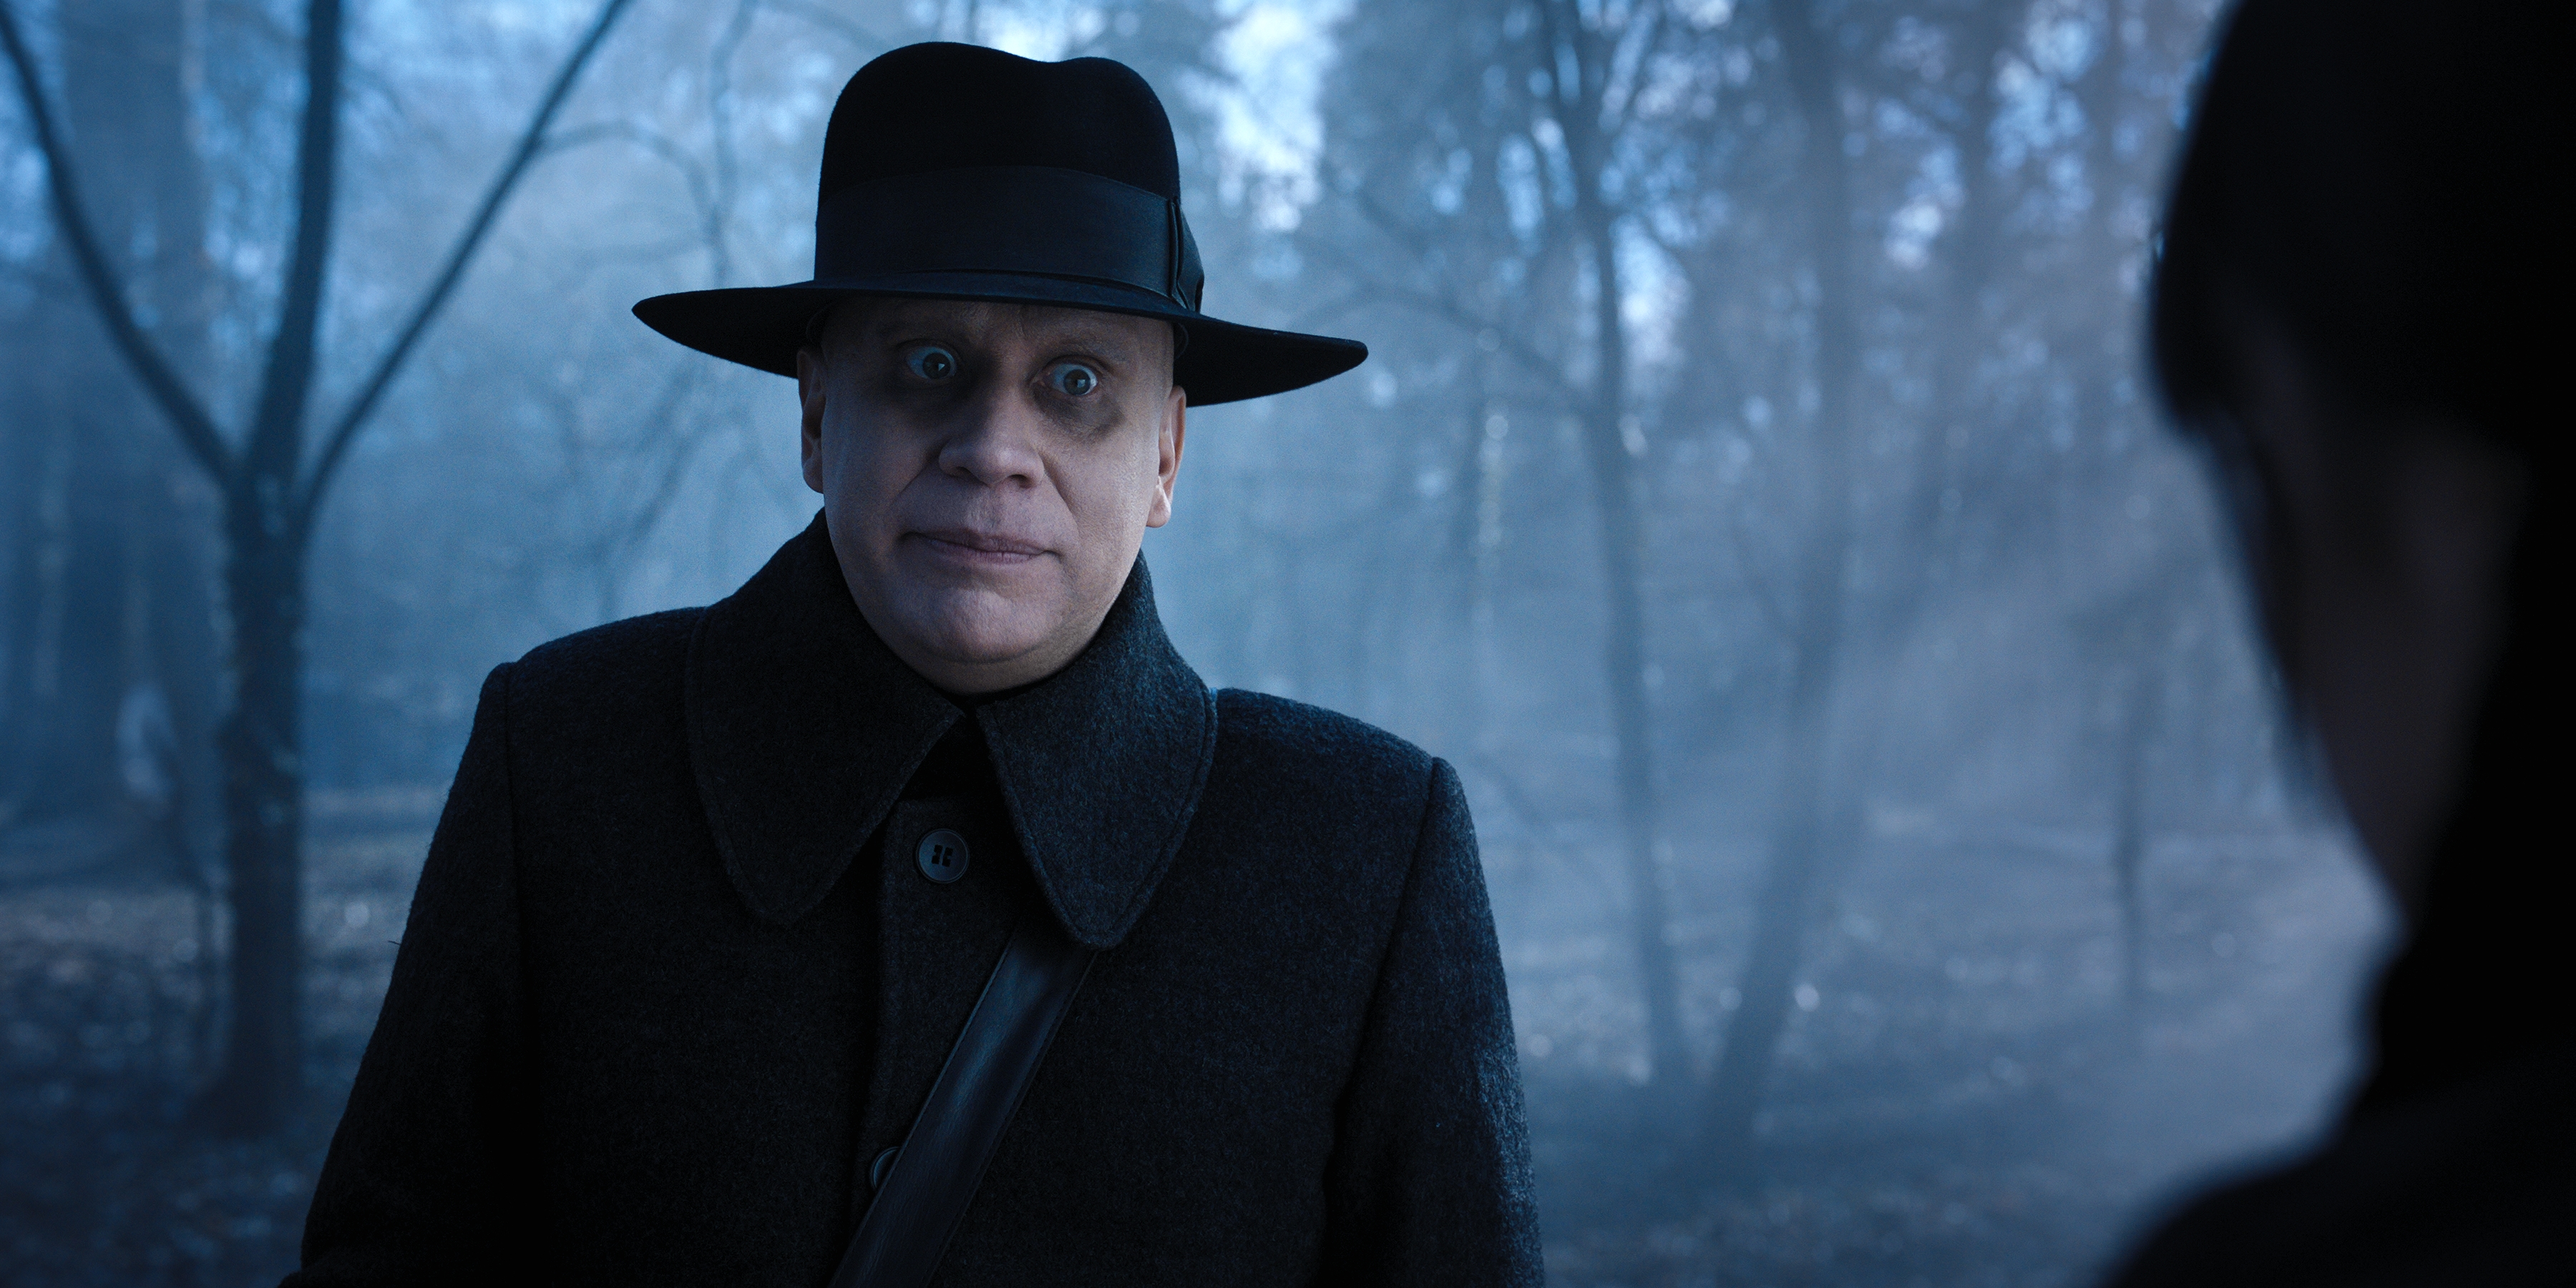 Fred Armisen who plays Uncle Fester in Wednesday on Netflix NYCC trailer